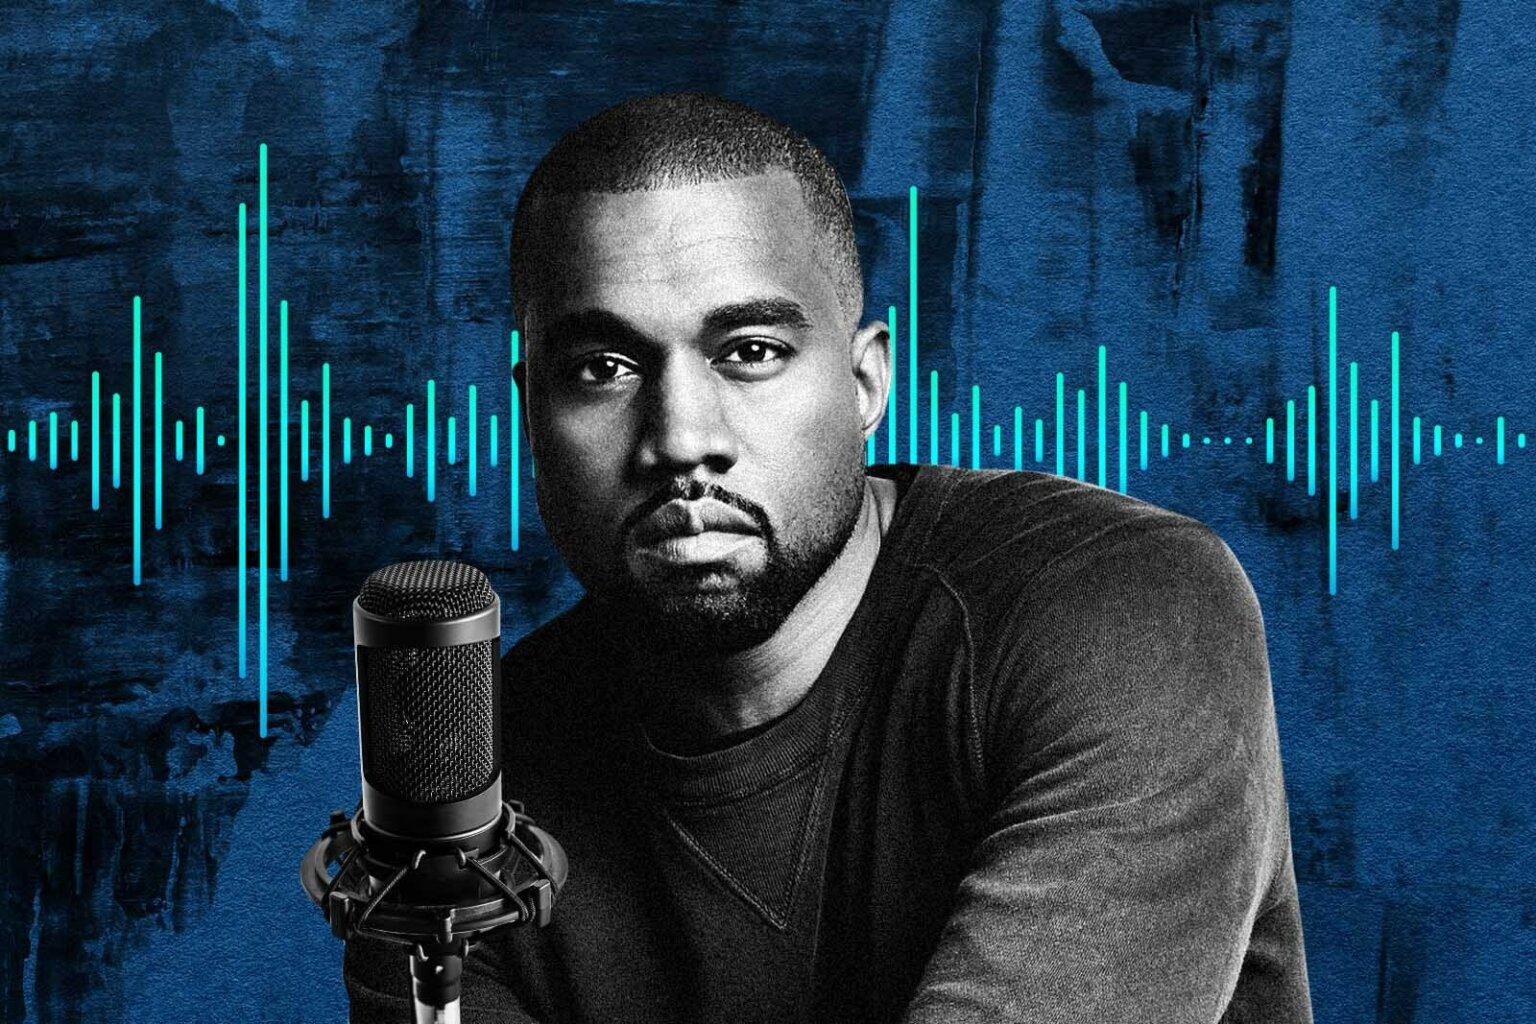 Kanye West’s Unreleased Track Sold as an NFT - DailyCoin